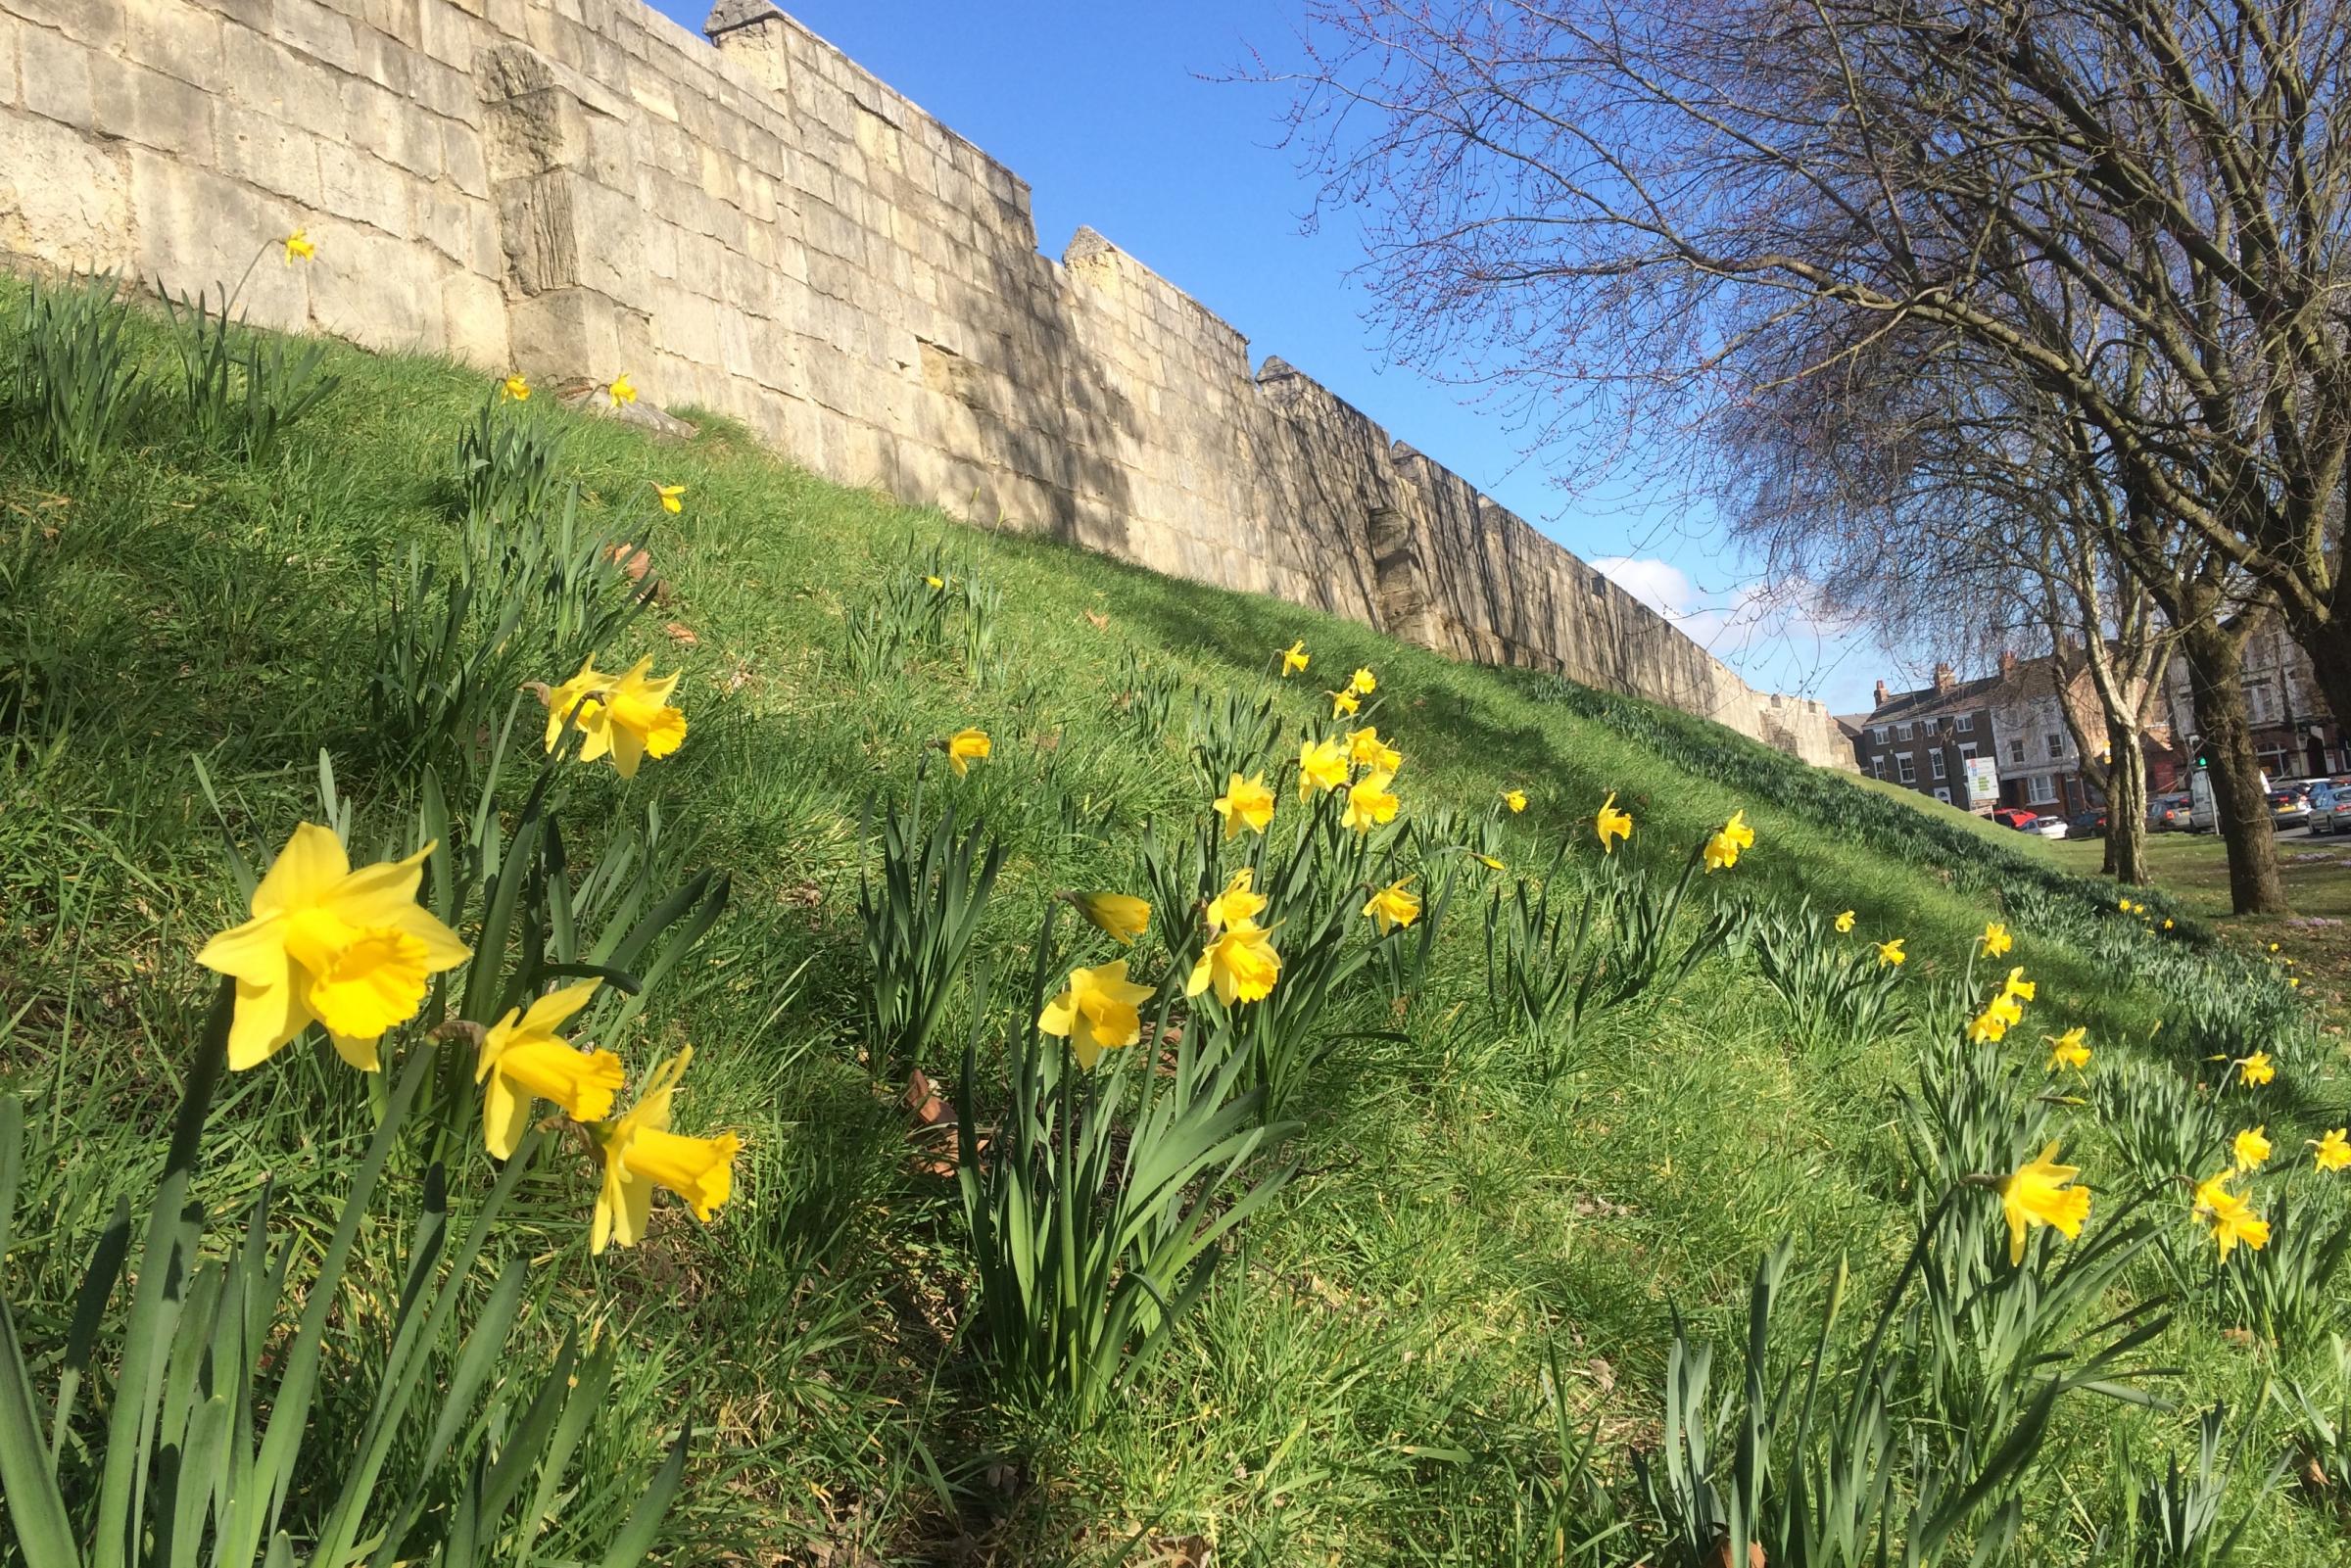 Blooming beautiful weather - the daffs are out as temperatures head for 14C